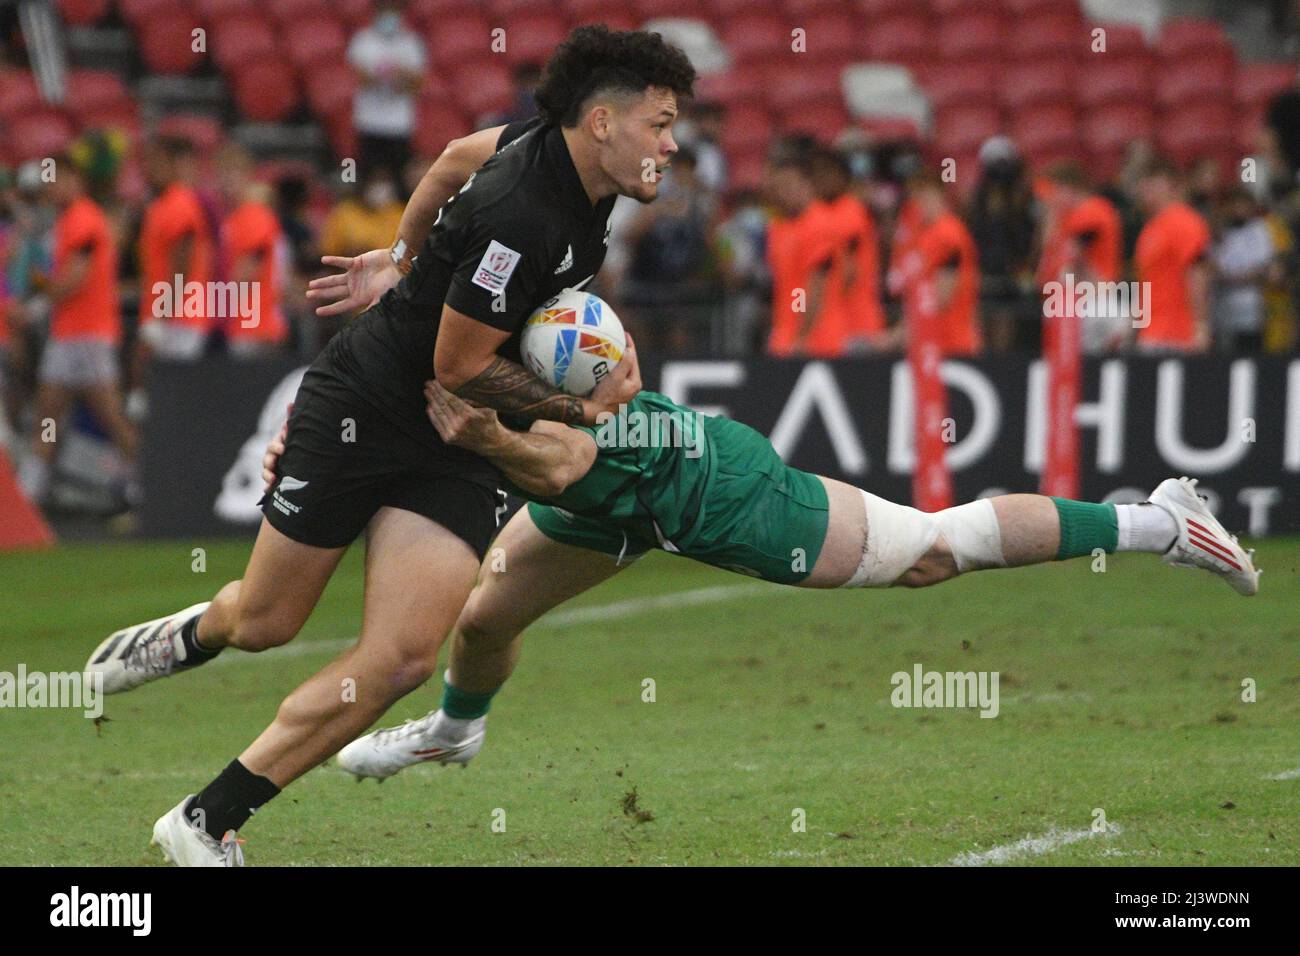 Singapore. 10th Apr, 2022. Caleb Tangitau (L) of New Zealand competes during the semifinal between Ireland and New Zealand at the HSBC World Rugby Sevens Singapore stop, held in the National Stadium on April 10, 2022. Credit: Then Chih Wey/Xinhua/Alamy Live News Stock Photo